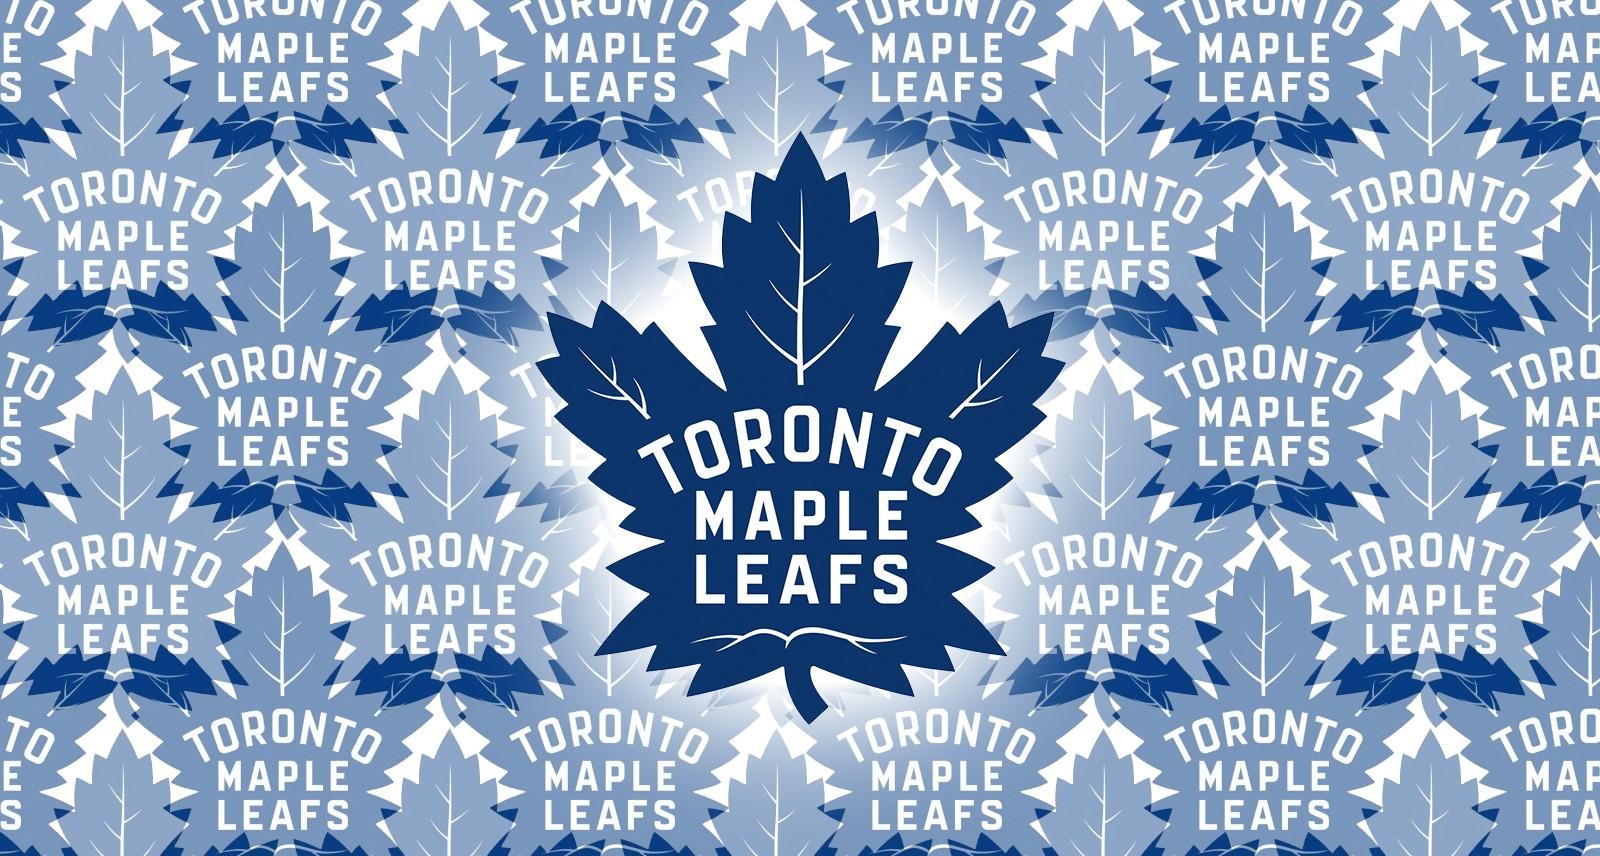 New Maple Leafs Logo - Here's Your First Look at the New Toronto Maple Leafs Logo | Sharp ...